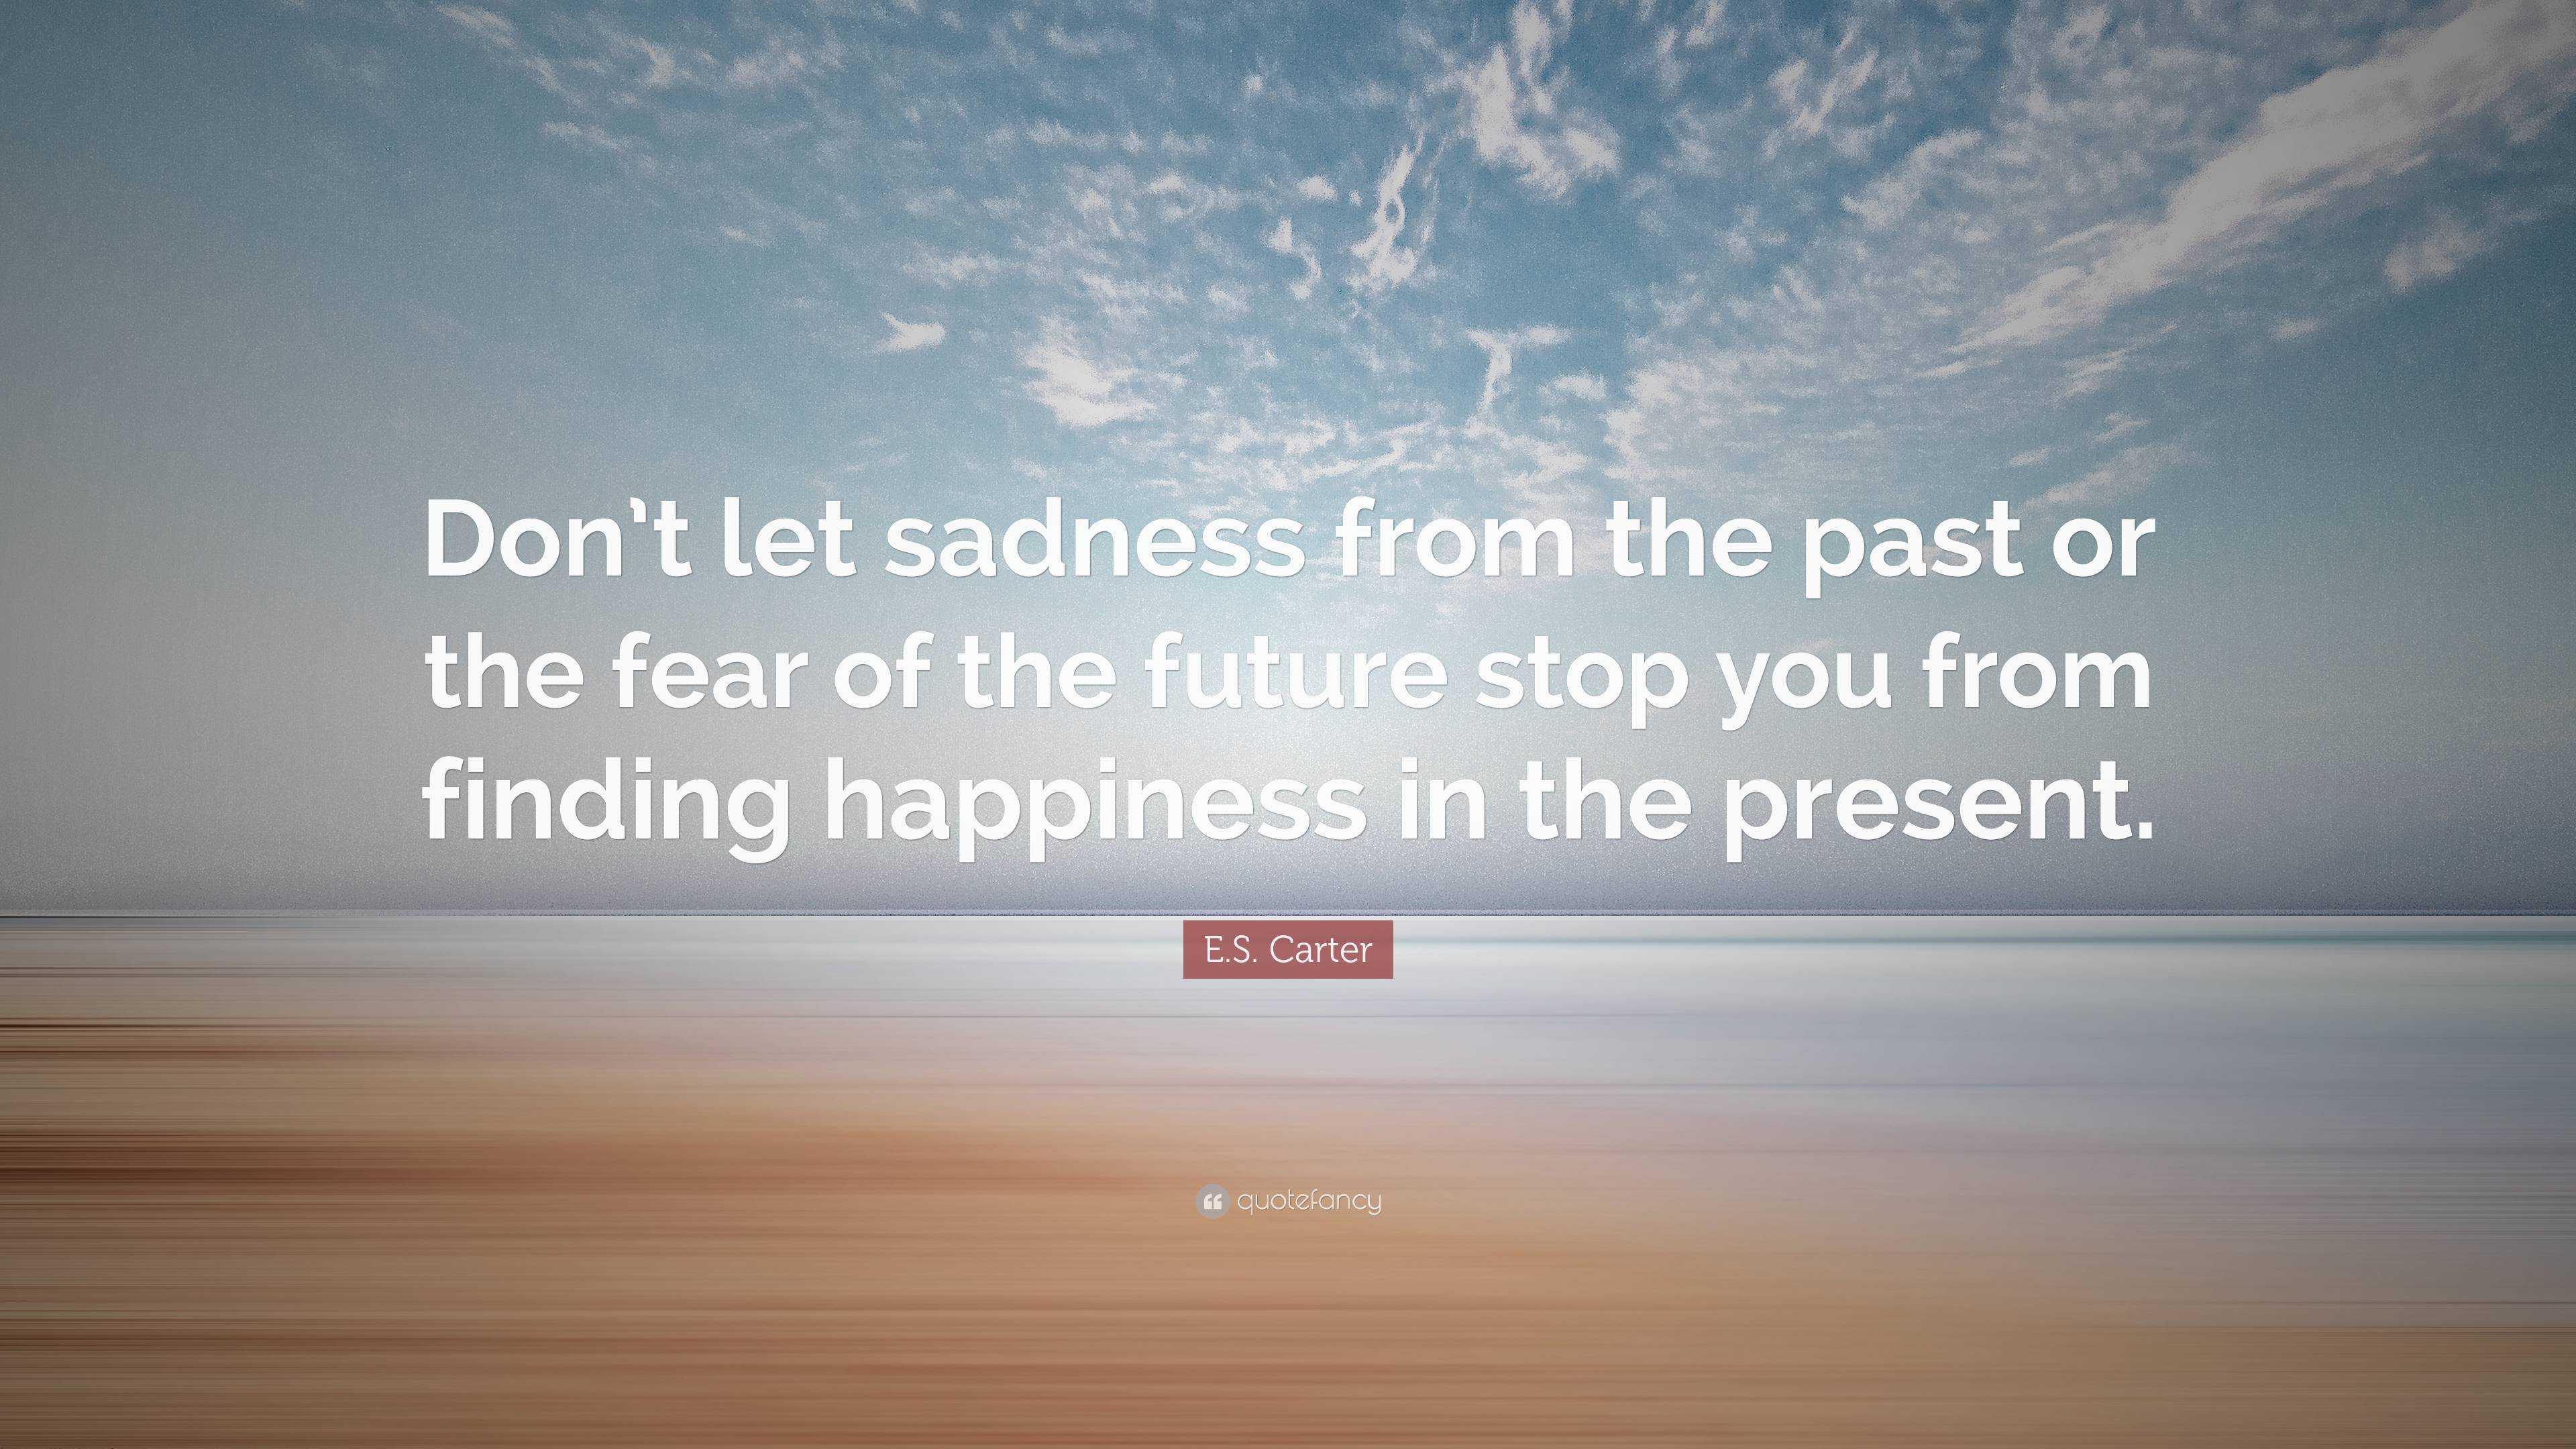 E.S. Carter Quote: “Don’t let sadness from the past or the fear of the ...